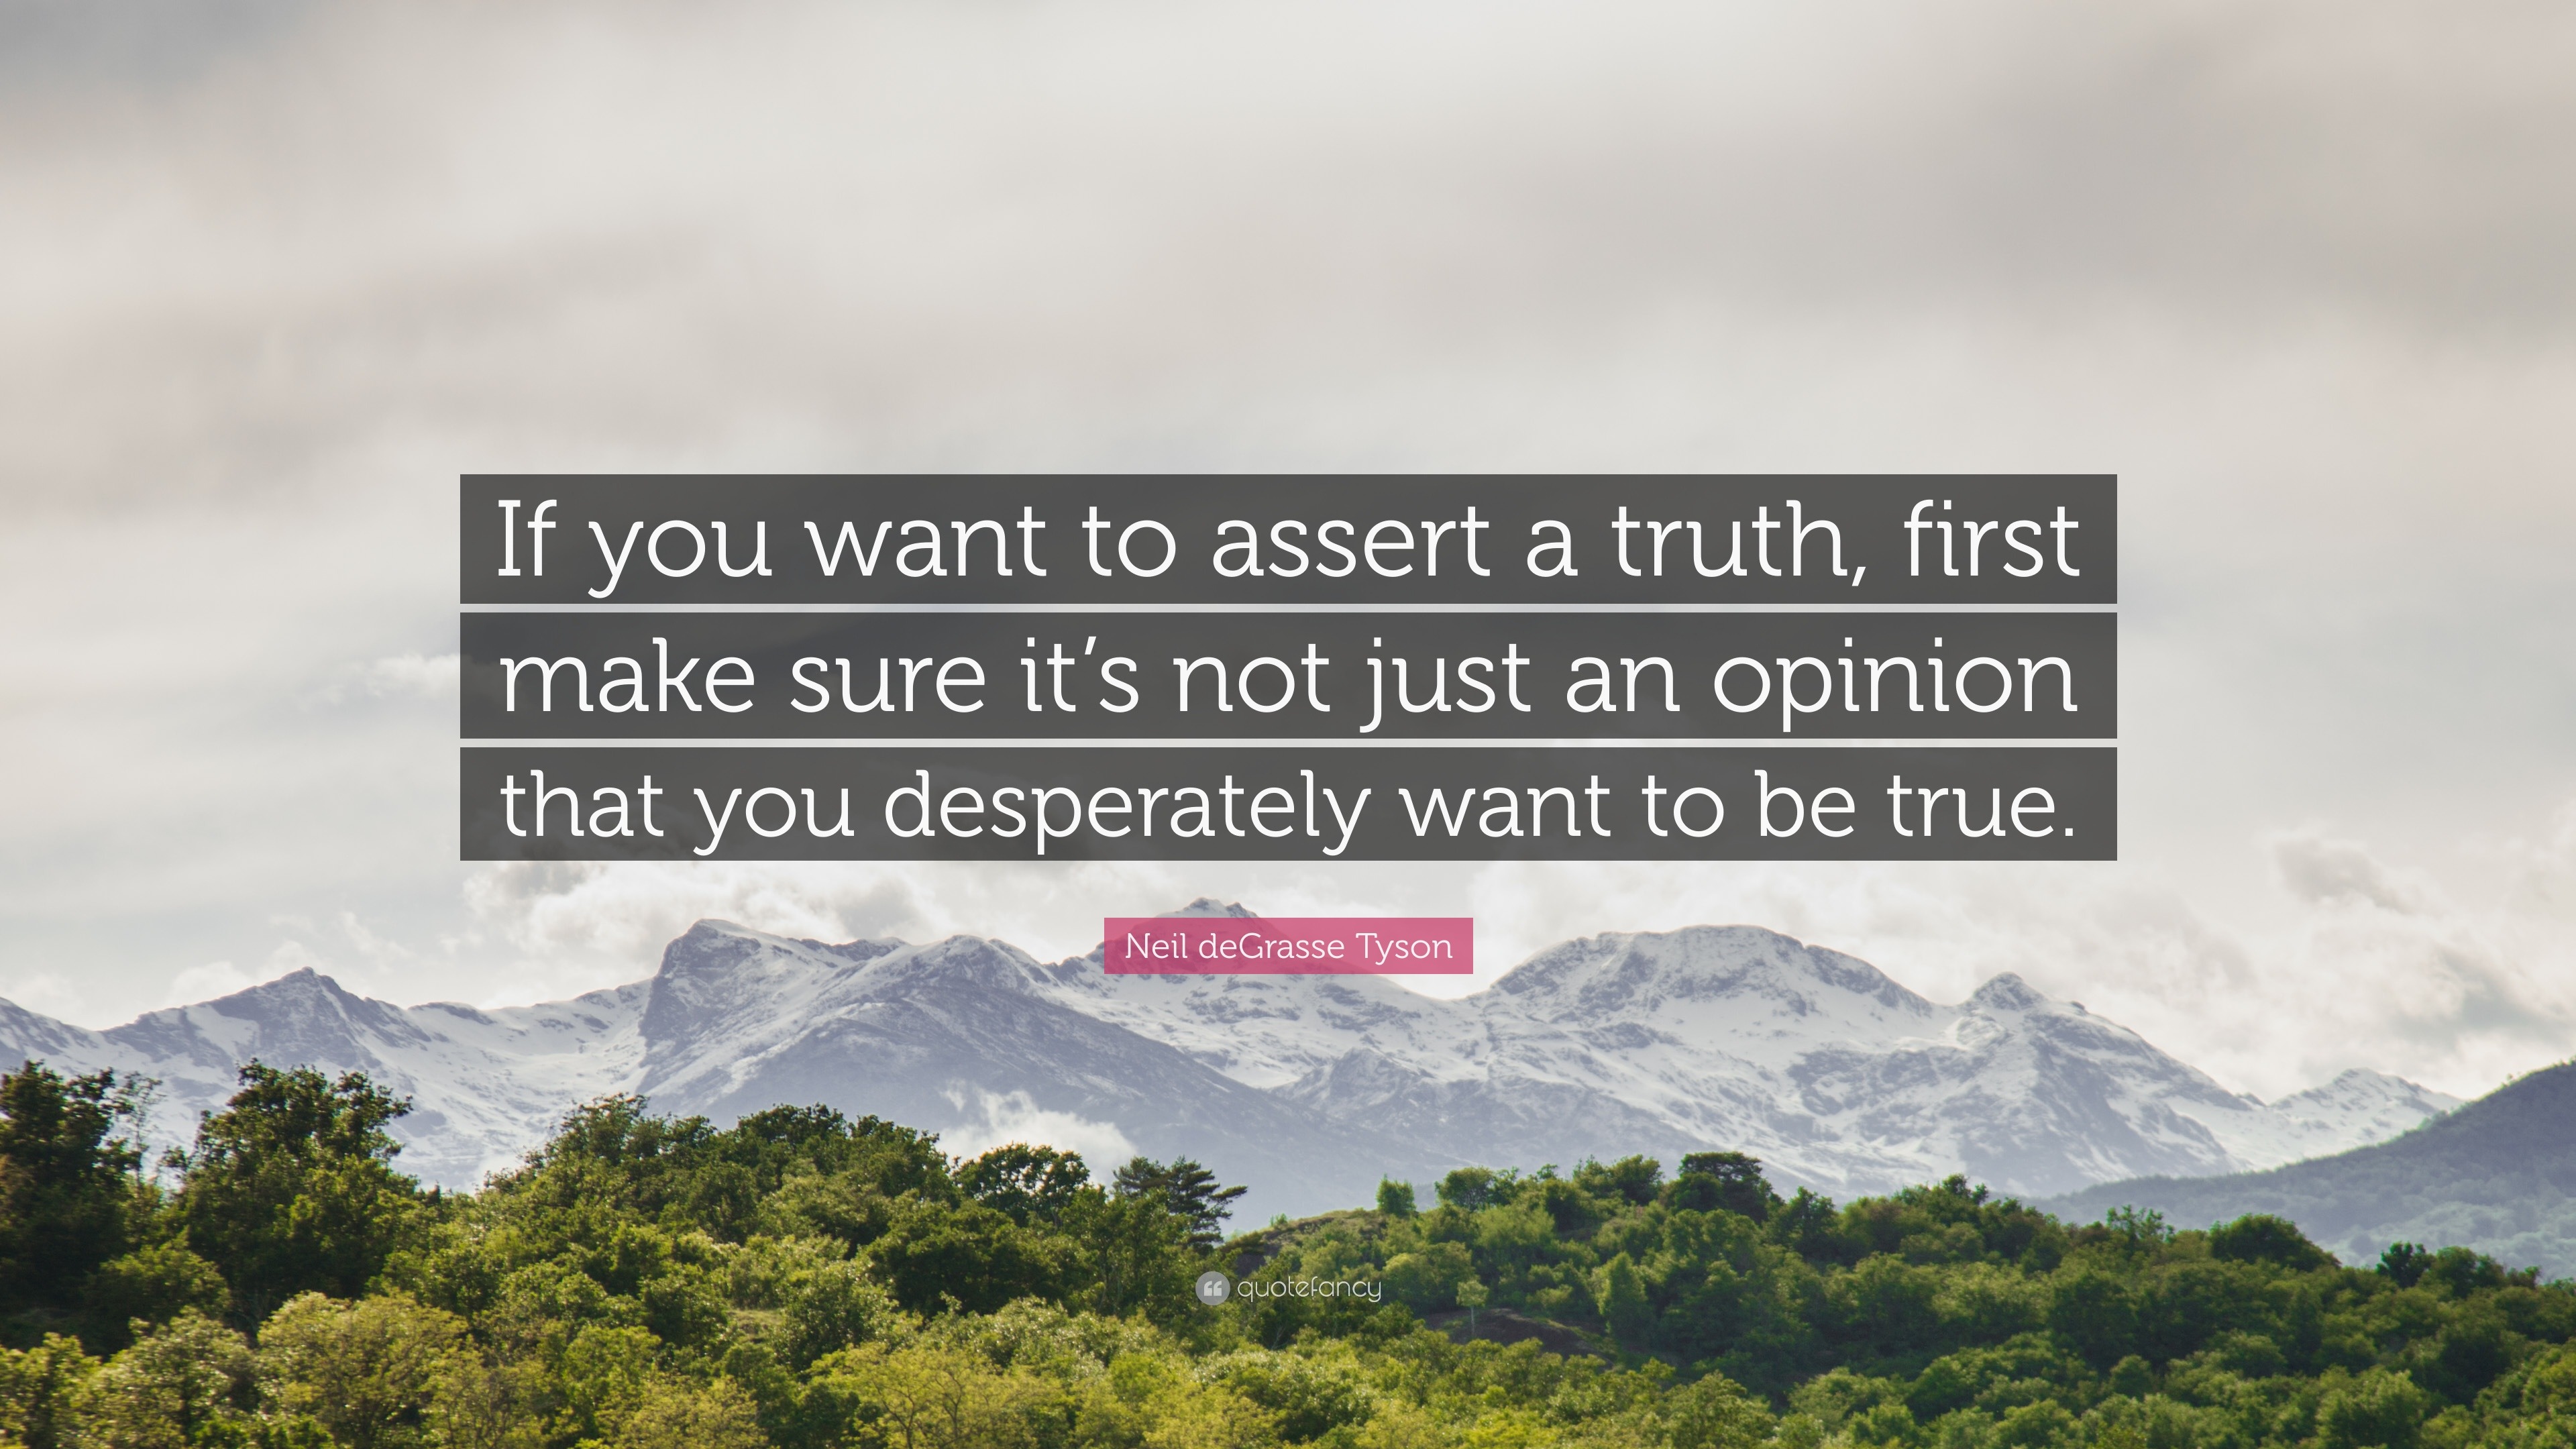 107553-Neil-deGrasse-Tyson-Quote-If-you-want-to-assert-a-truth-first-make.jpg